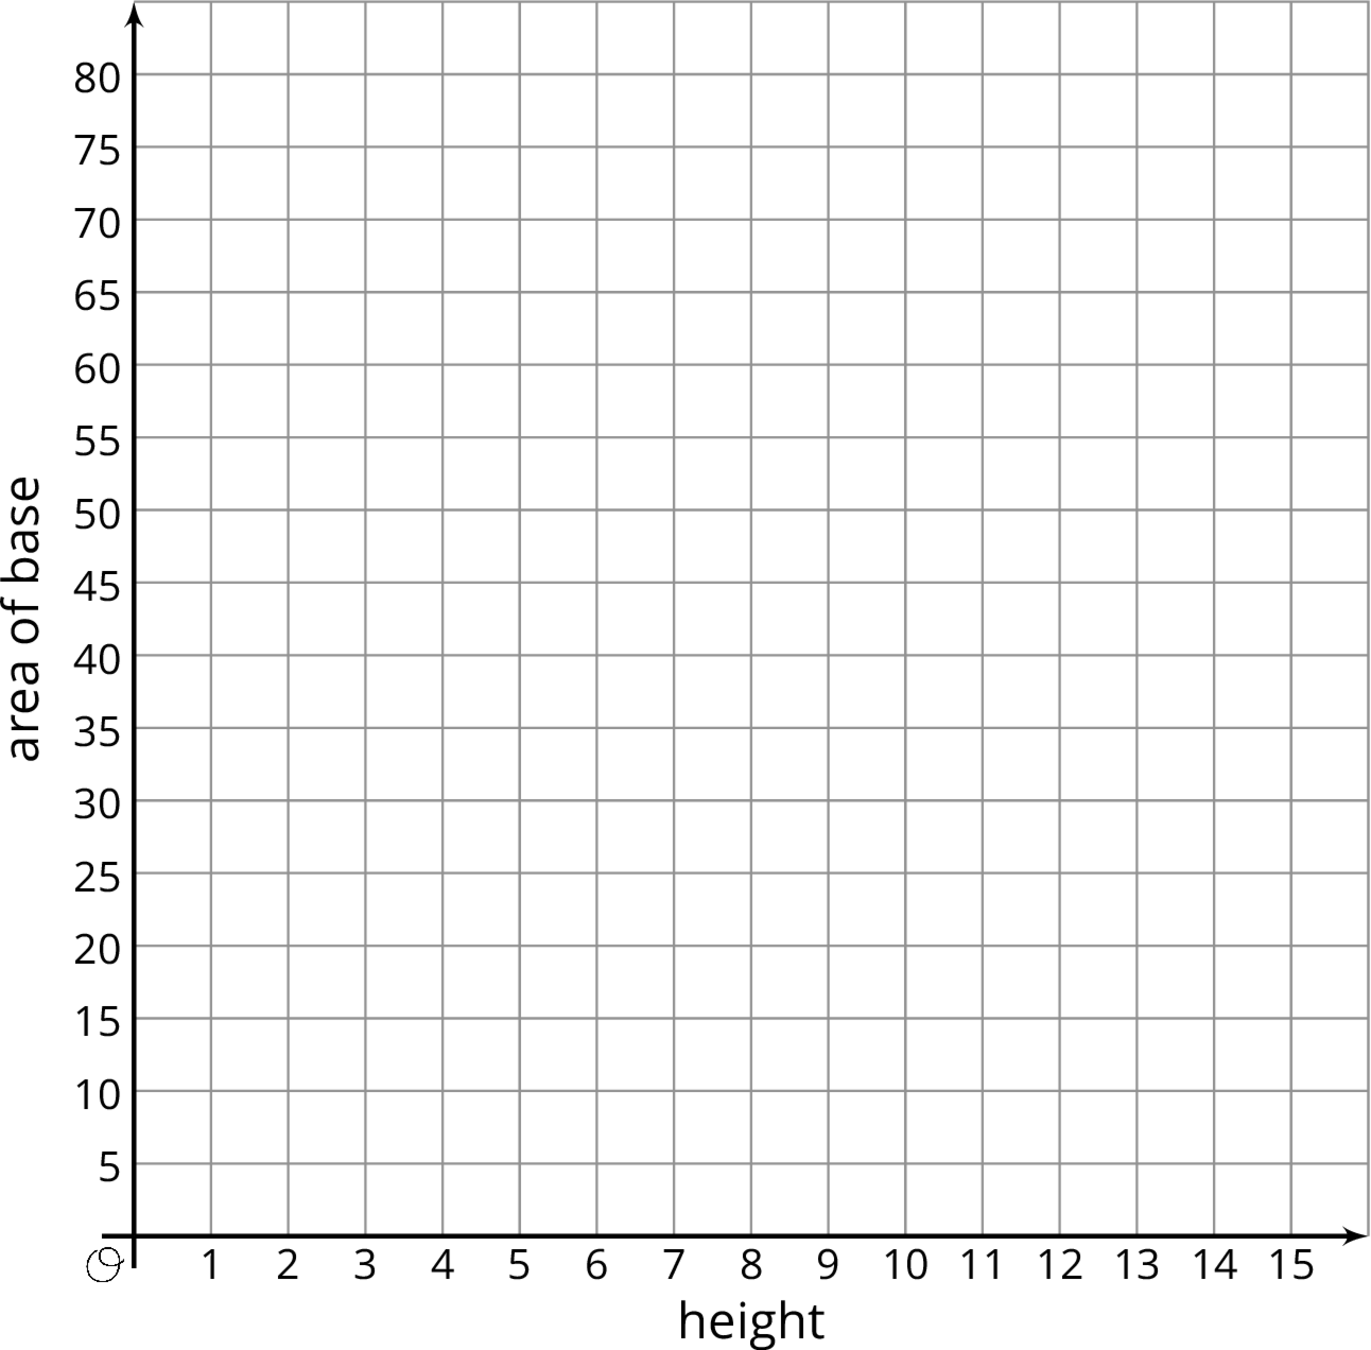 A blank coordinate plane with the origin labeled "O". The horizontal axis is labeled "height", and the numbers 0 through 15 are indicated. The vertical axis is labeled "area of base", and the numbers 0 through 80, in increments of 5, are indicated.